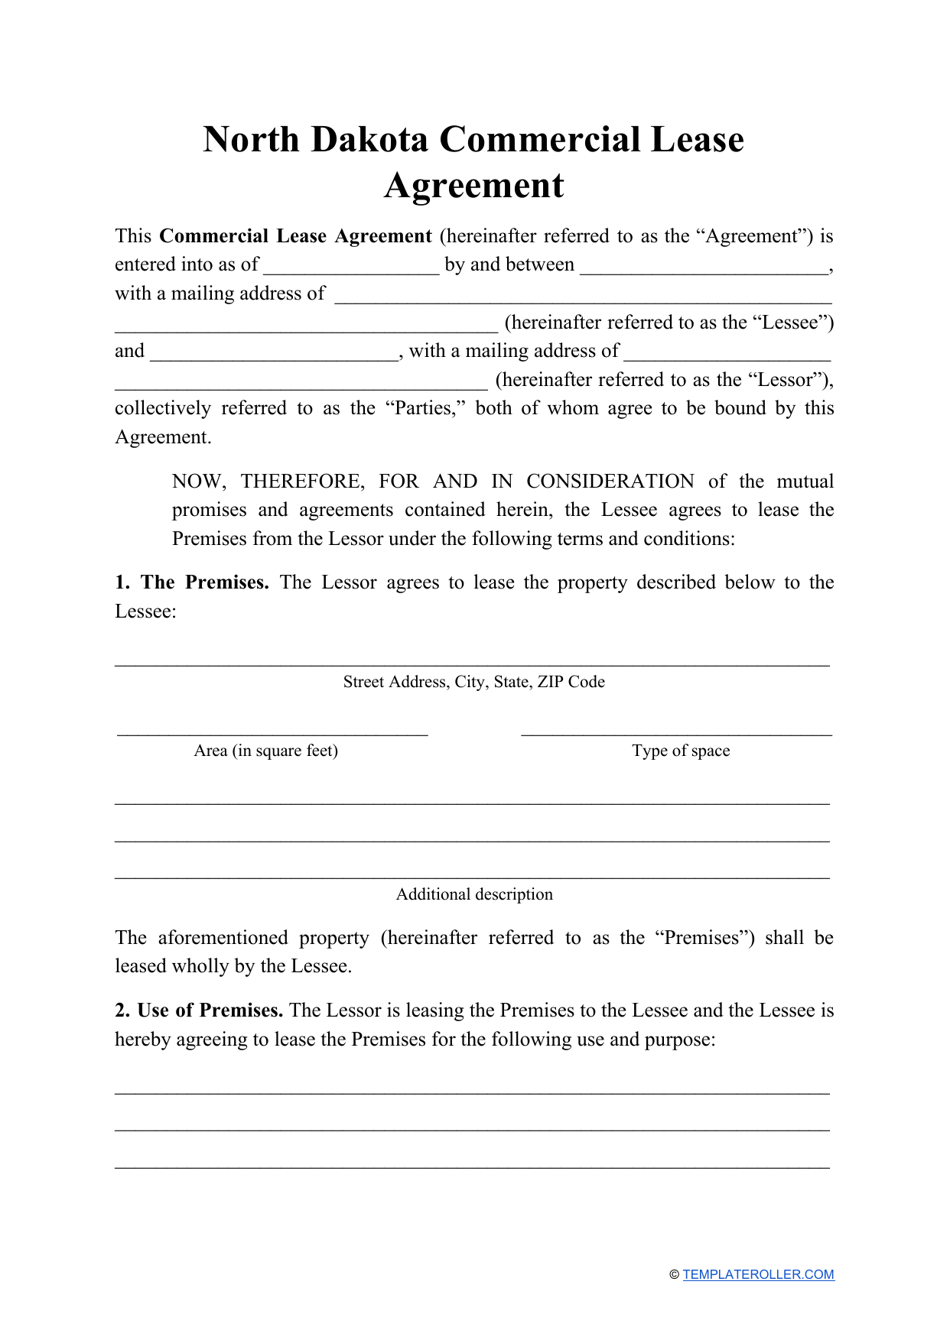 Commercial Lease Agreement Template - North Dakota, Page 1